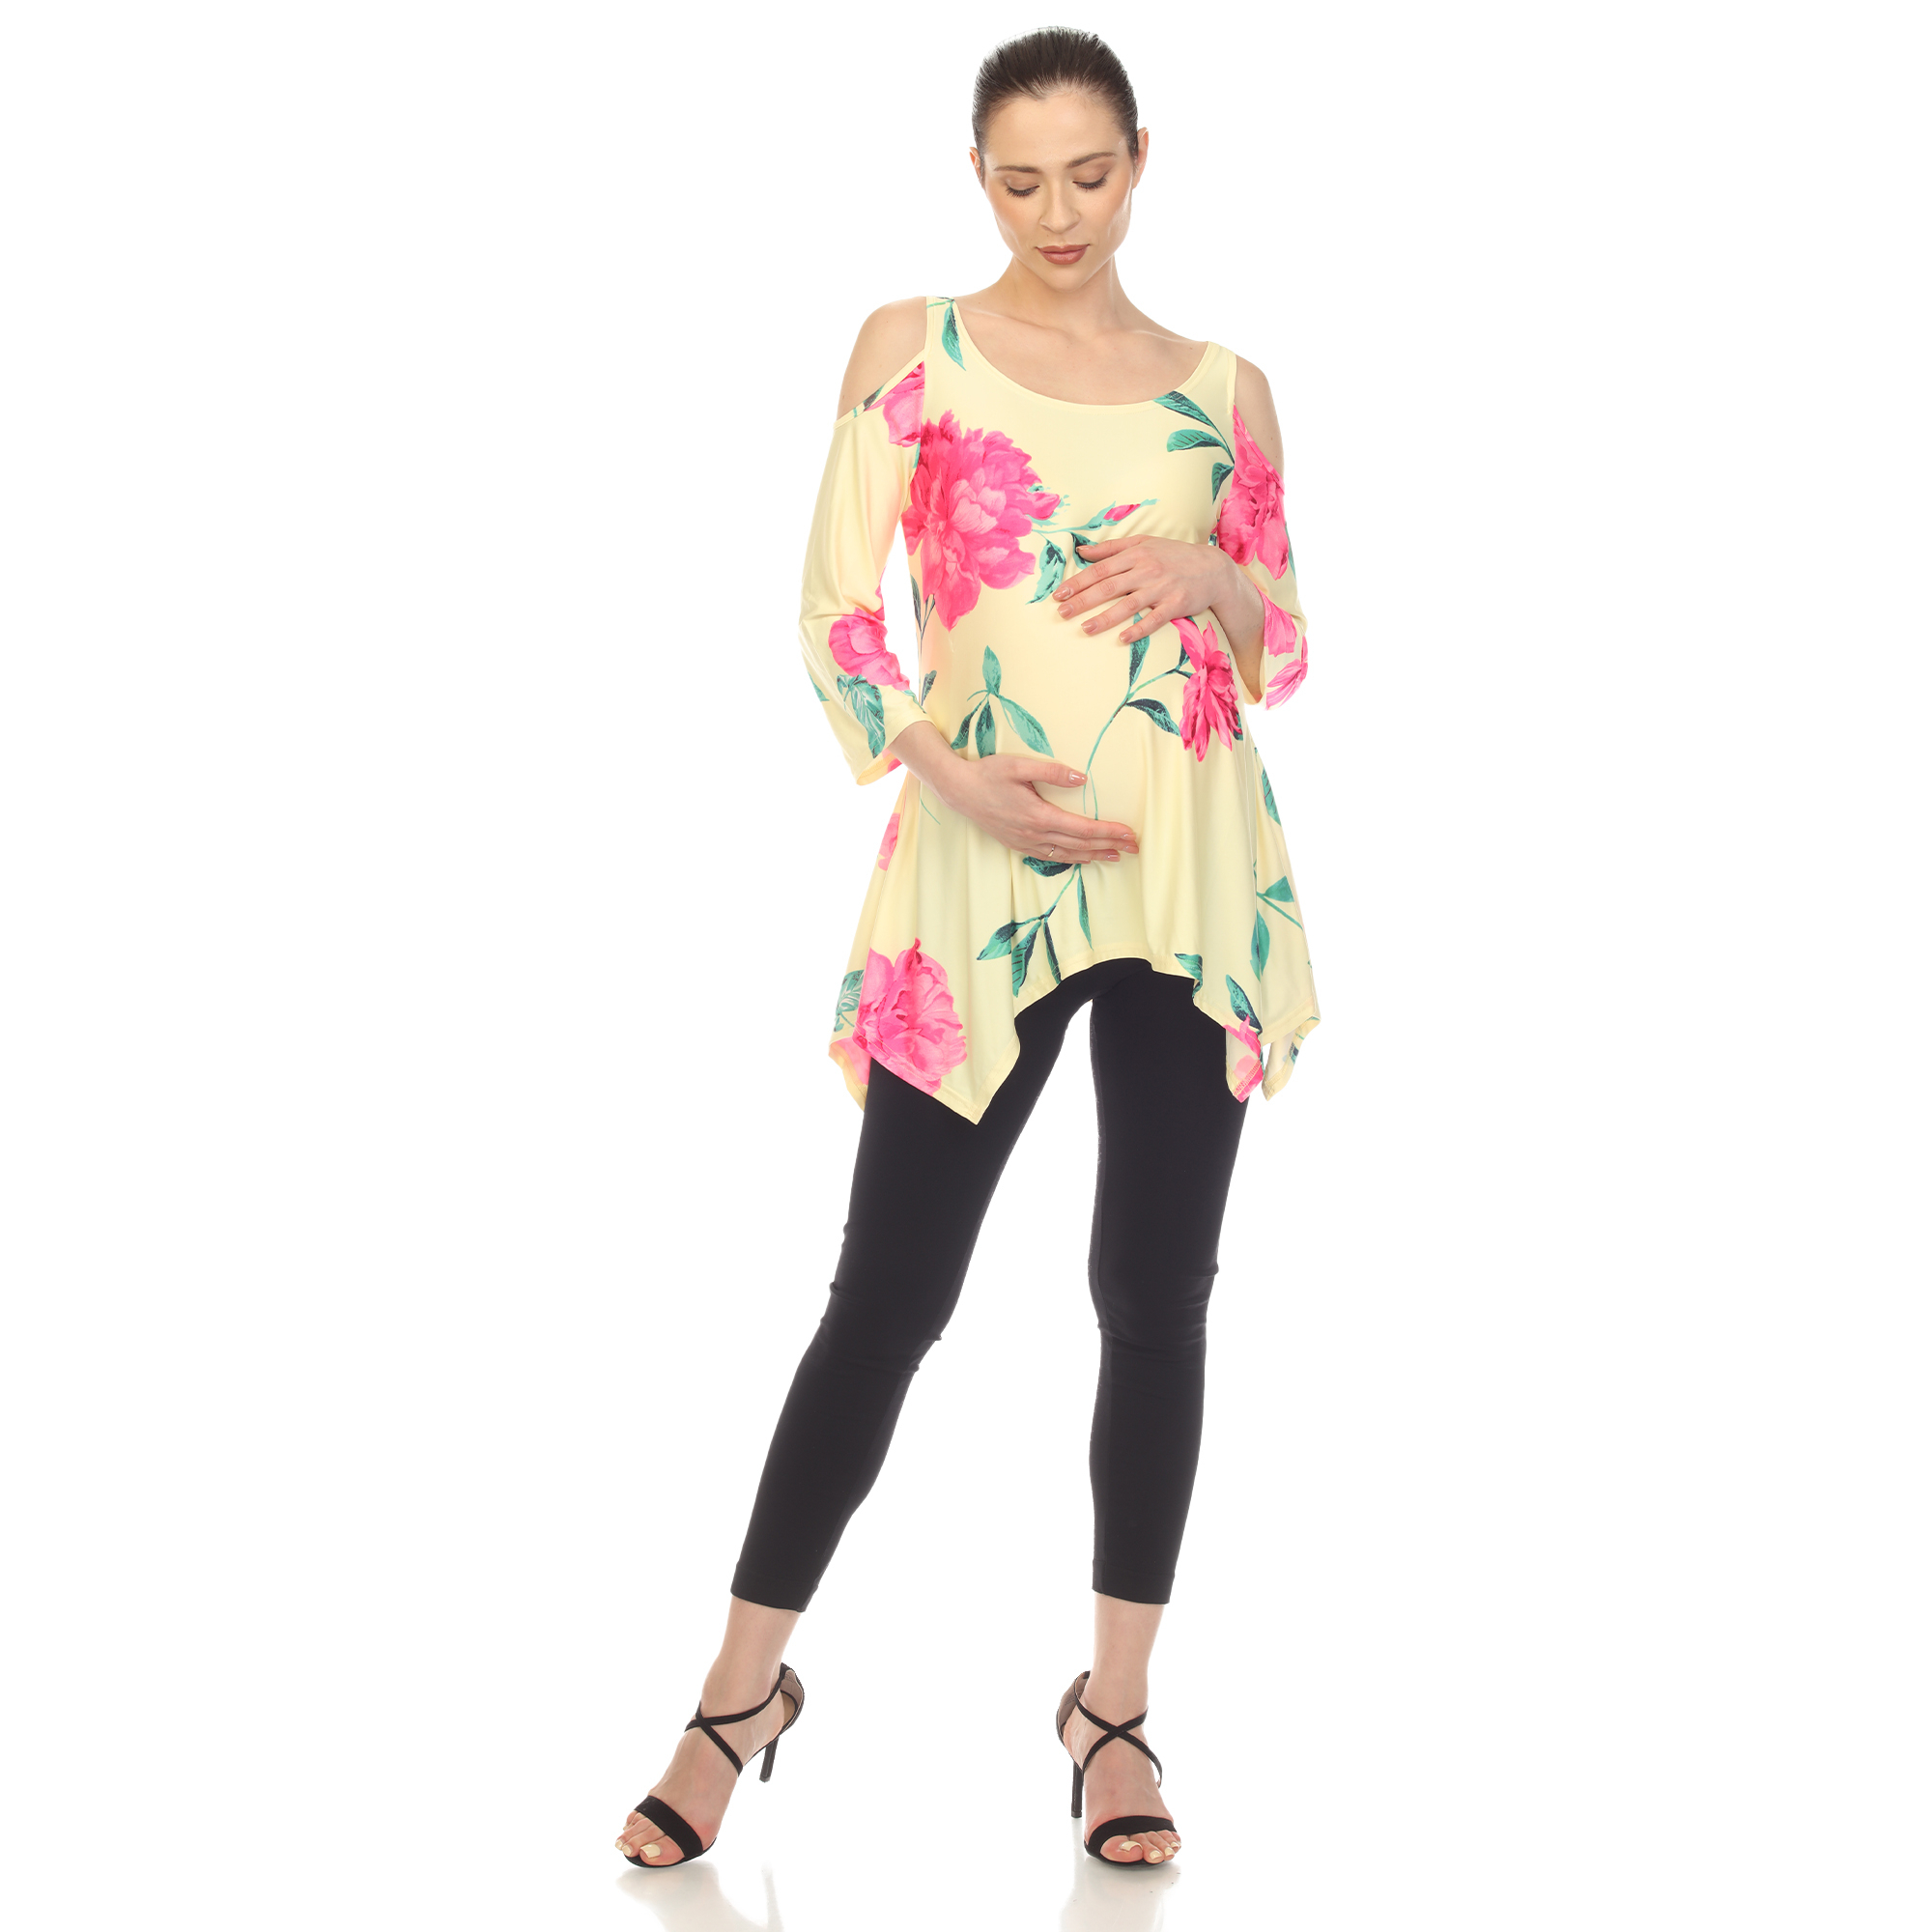 White Mark Women's Maternity Floral Cold Shoulder Tunic Top - Yellow/Pink, Large